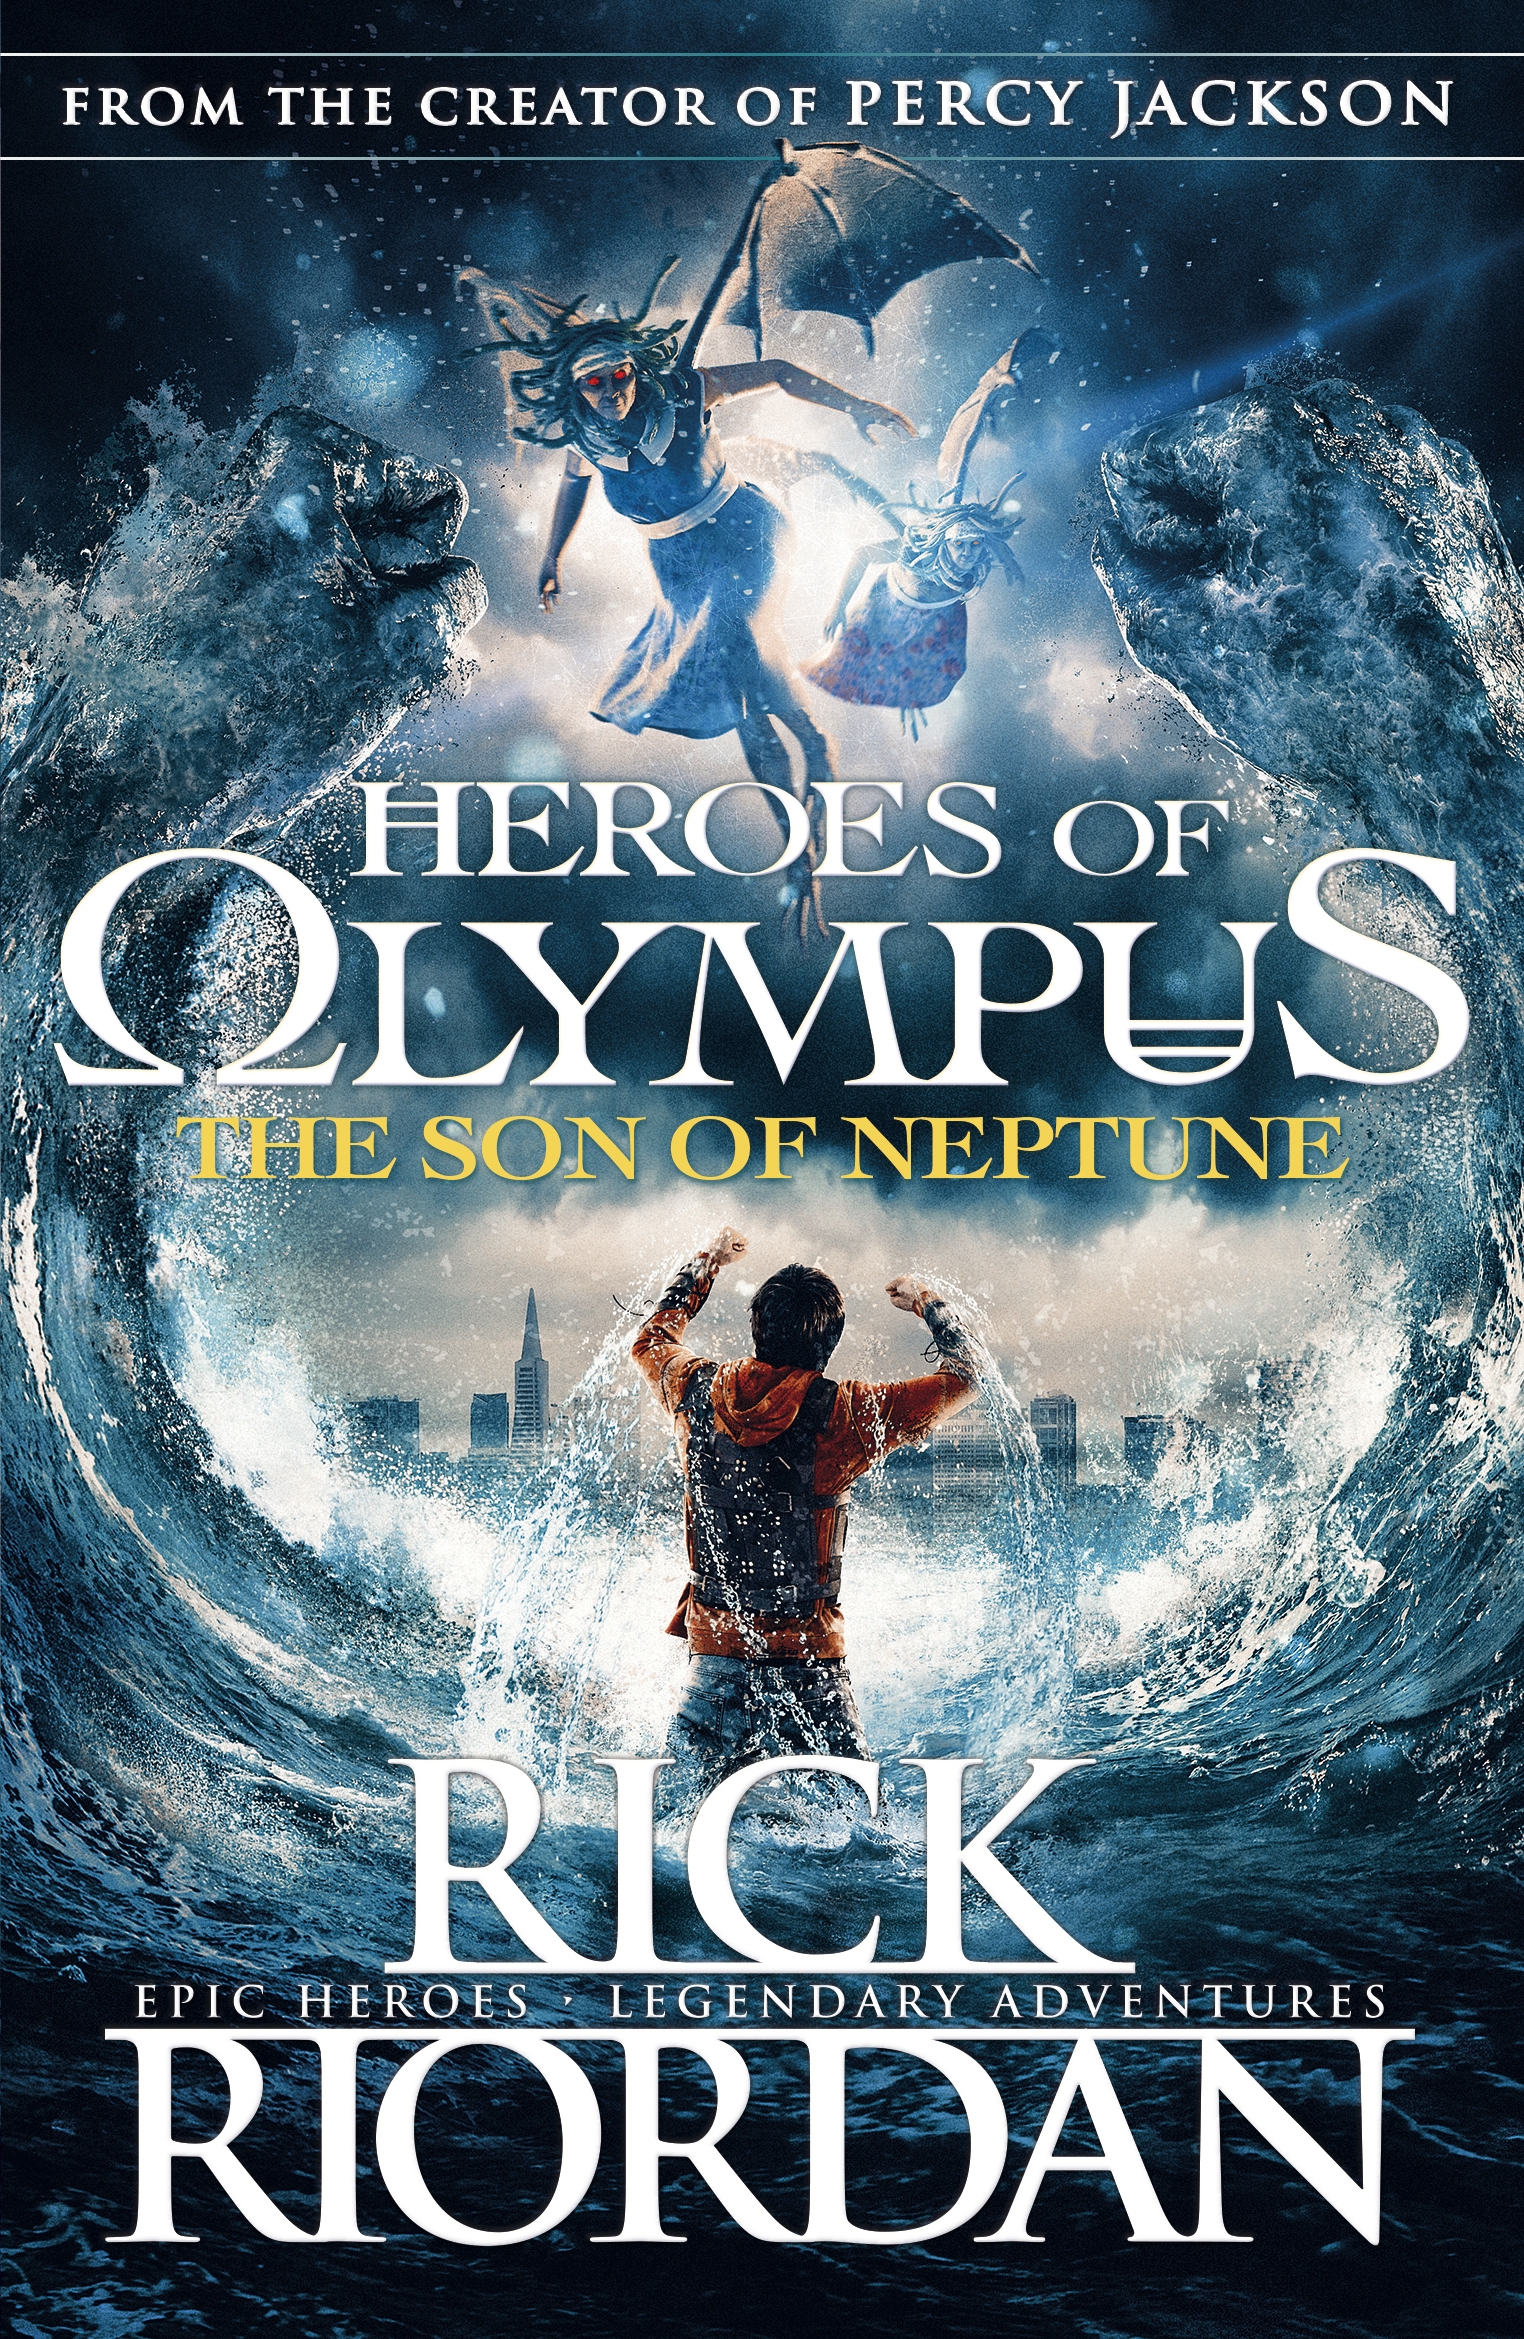 The Son Of Neptune Graphic Novel Read Online Ferisgraphics